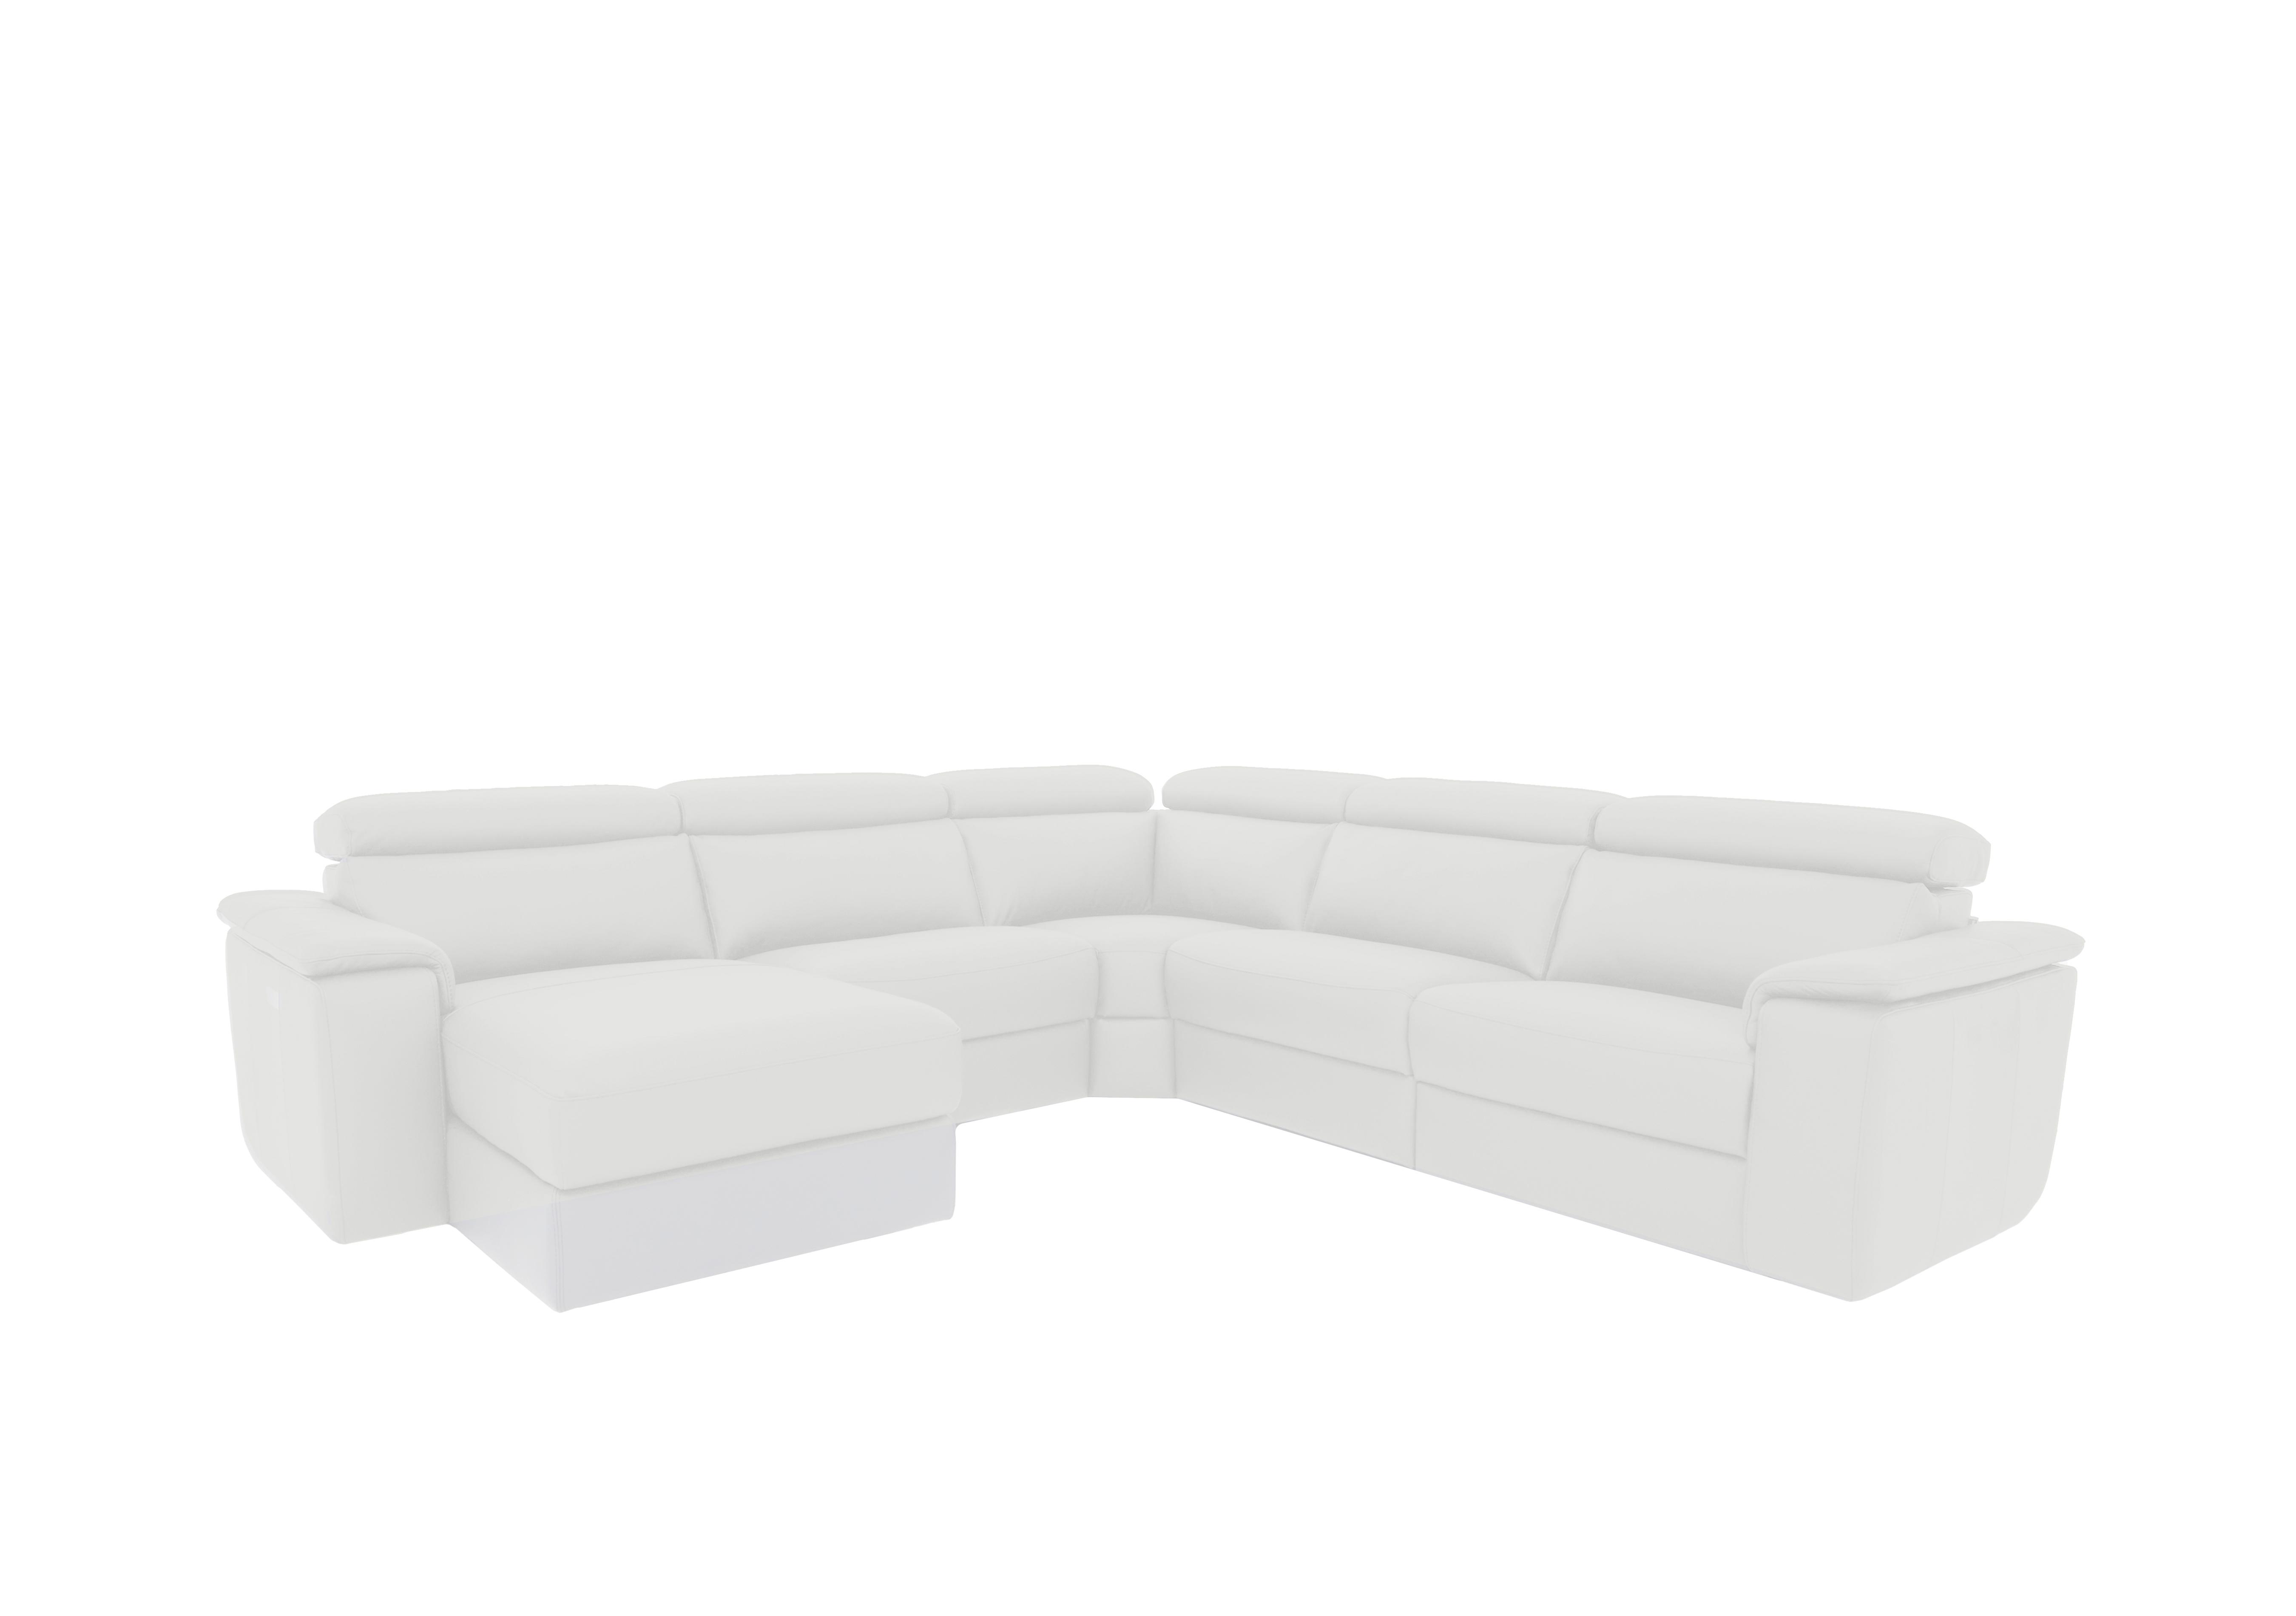 Davide Large Leather Corner Sofa with Chaise End in 370 Torello Bianco Puro on Furniture Village